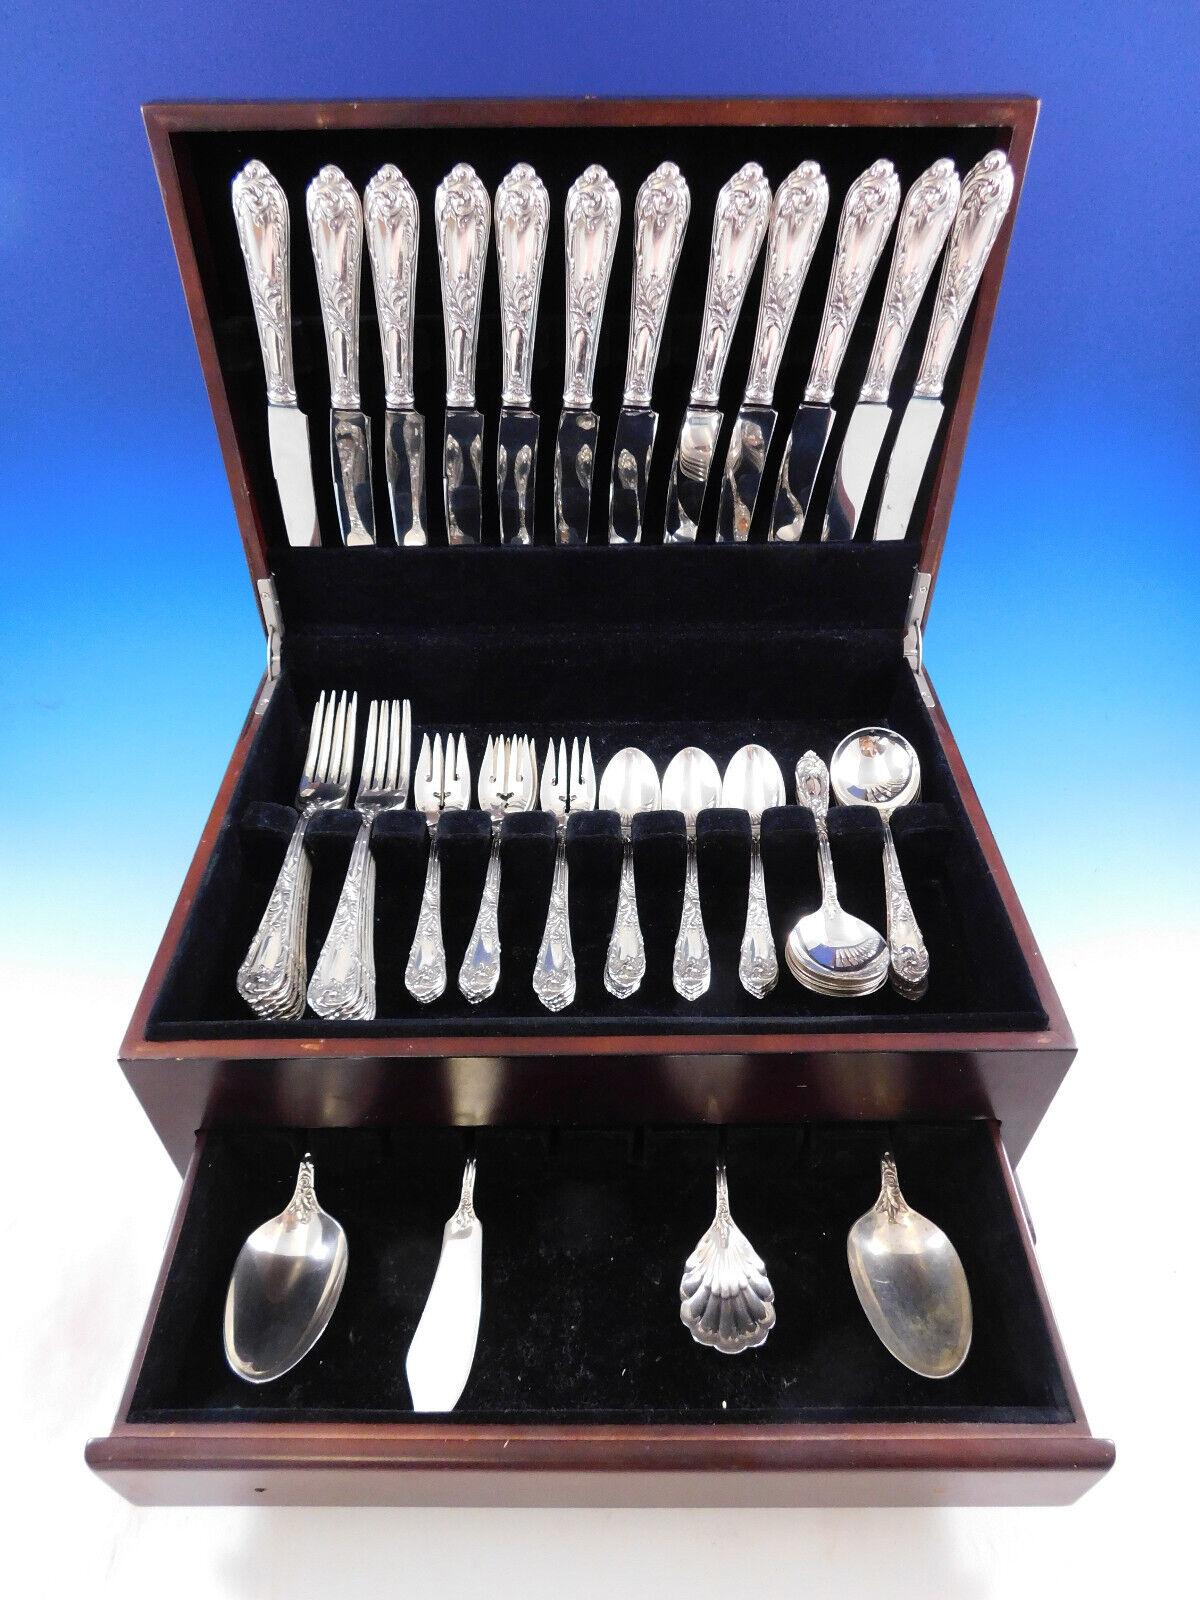 Dinner size Romaine by Reed and Barton, circa 1933, sterling silver flatware set - 64 pieces. This set includes:


12 Dinner Size Knives, 9 3/4